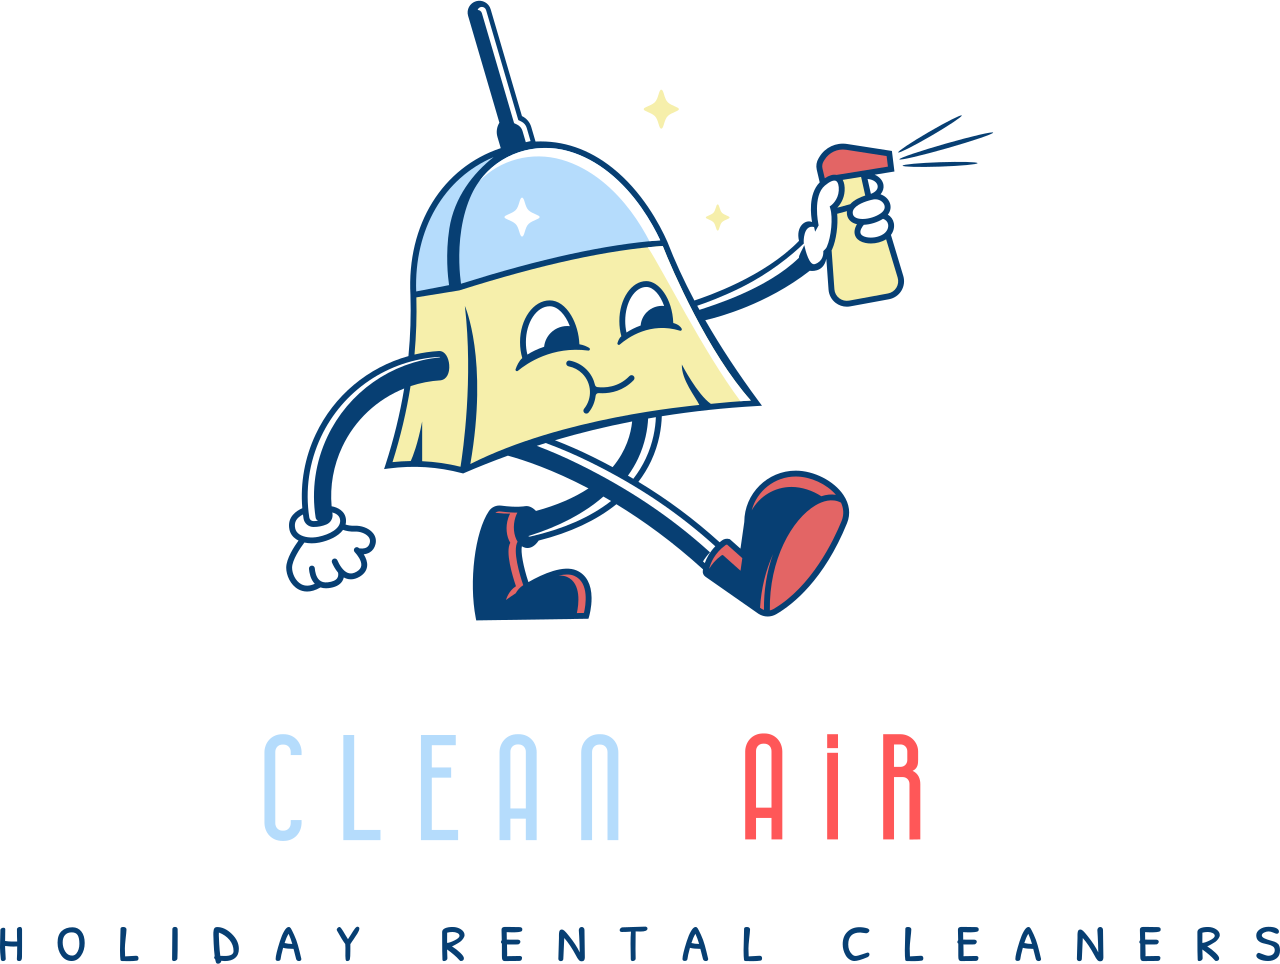 clean air holiday rental cleaners's logo